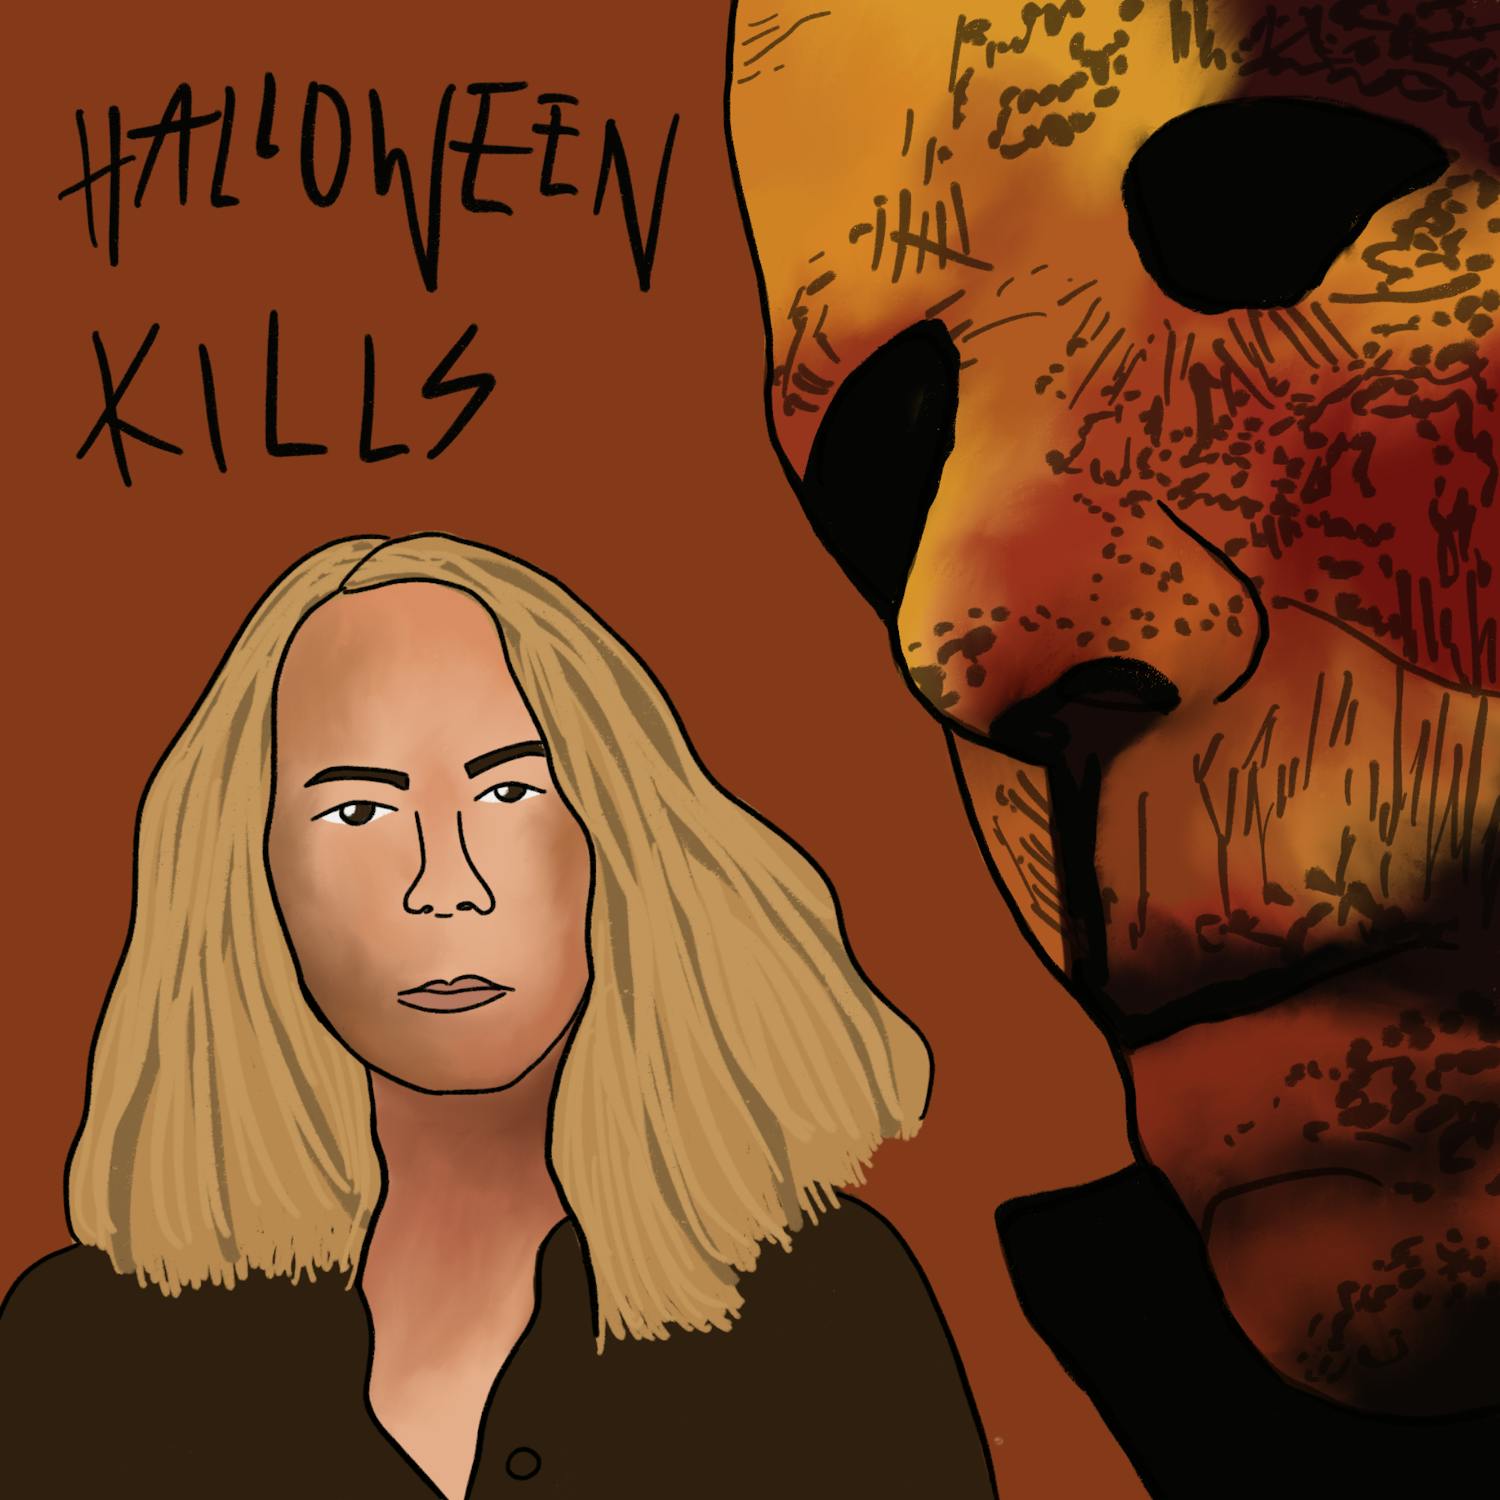 &quot;Halloween Kills&quot; was released Oct. 15 as the next installment of the new &quot;Halloween&quot; trilogy. The series is a direct continuation of John Carpenter&#x27;s original.